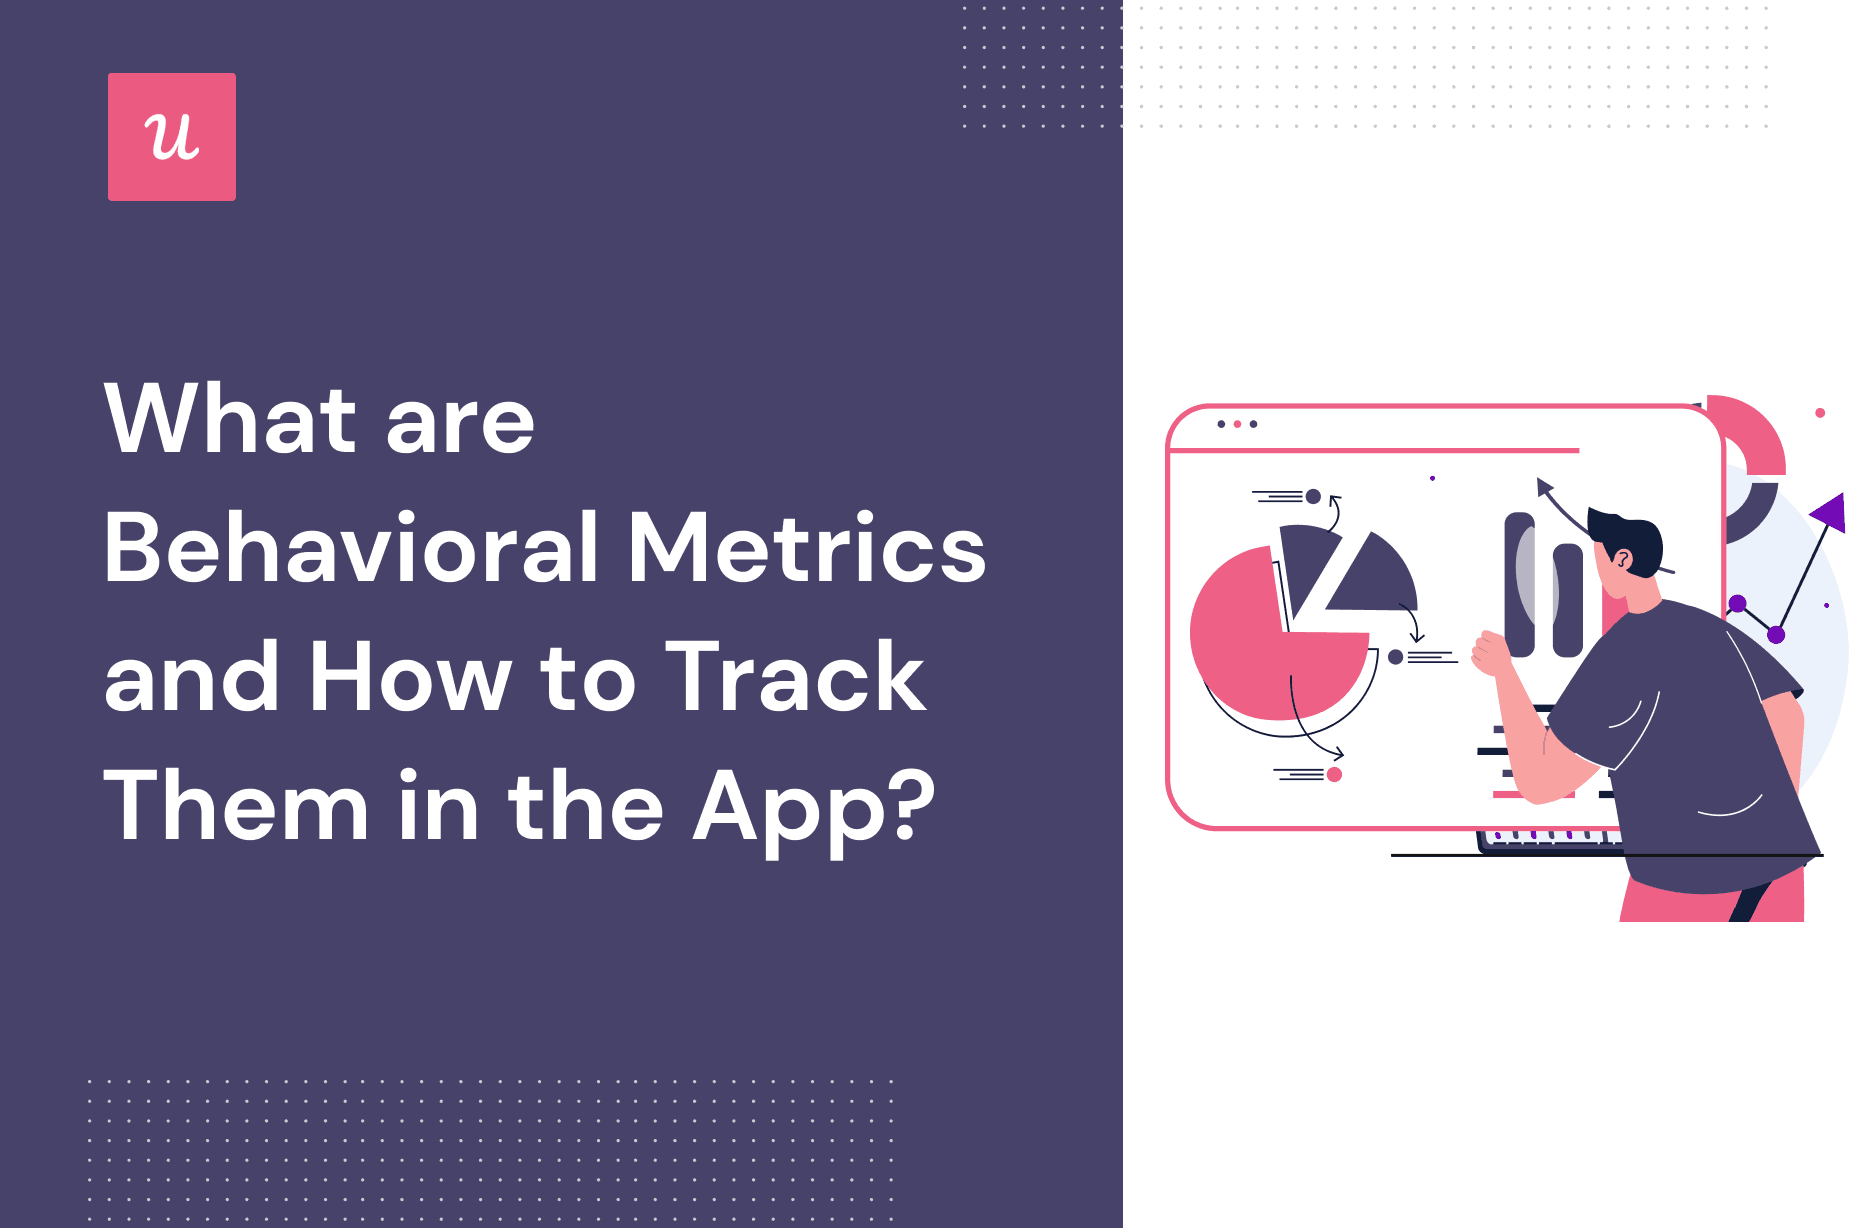 What Are Behavioral Metrics and How To Track Them in the App?